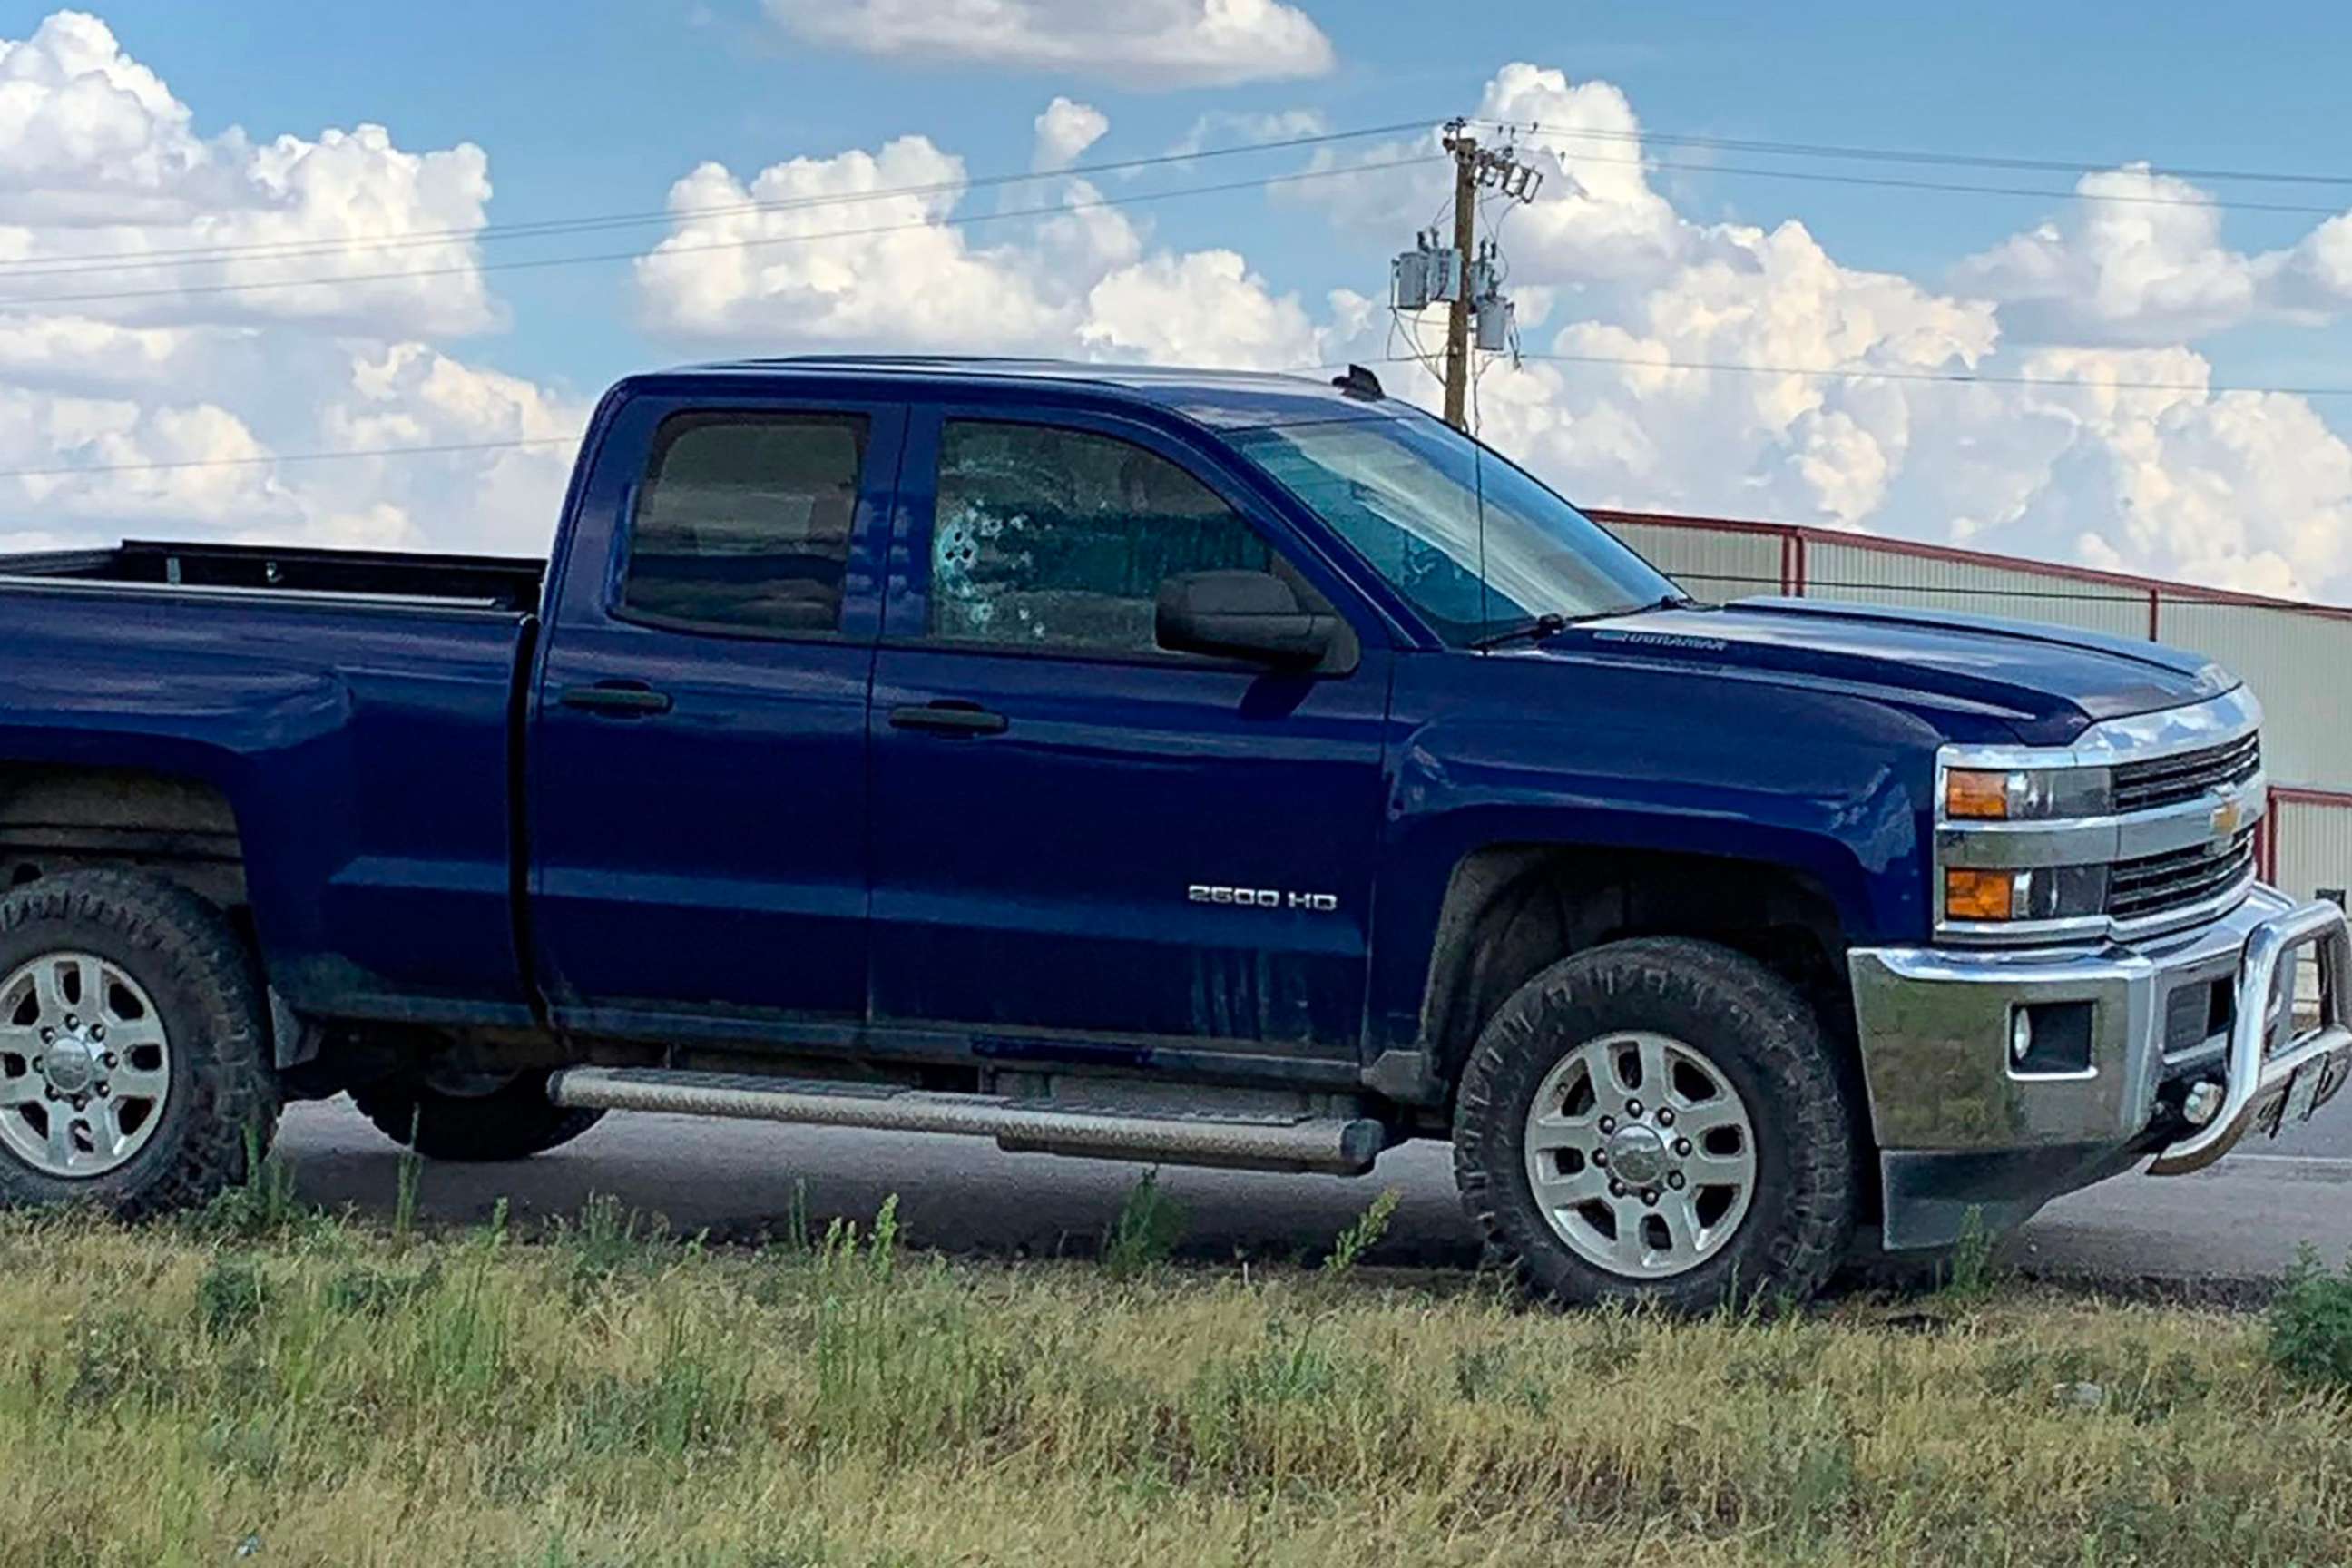 PHOTO: This handout image taken on Aug. 31, 2019, shows a car with bullet holes in the window after a gunman opened fire on the I-20 highway in between Odessa and Midland, Texas.